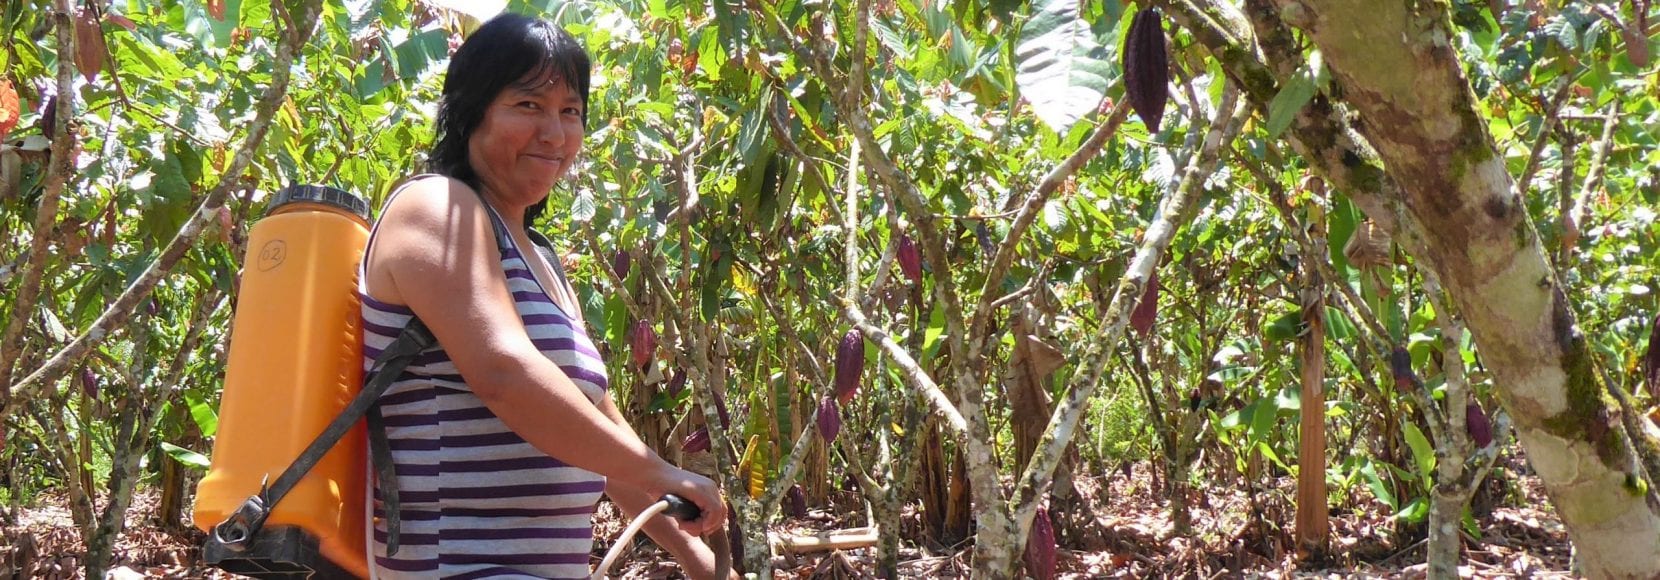 Woman working through her cocoa crops